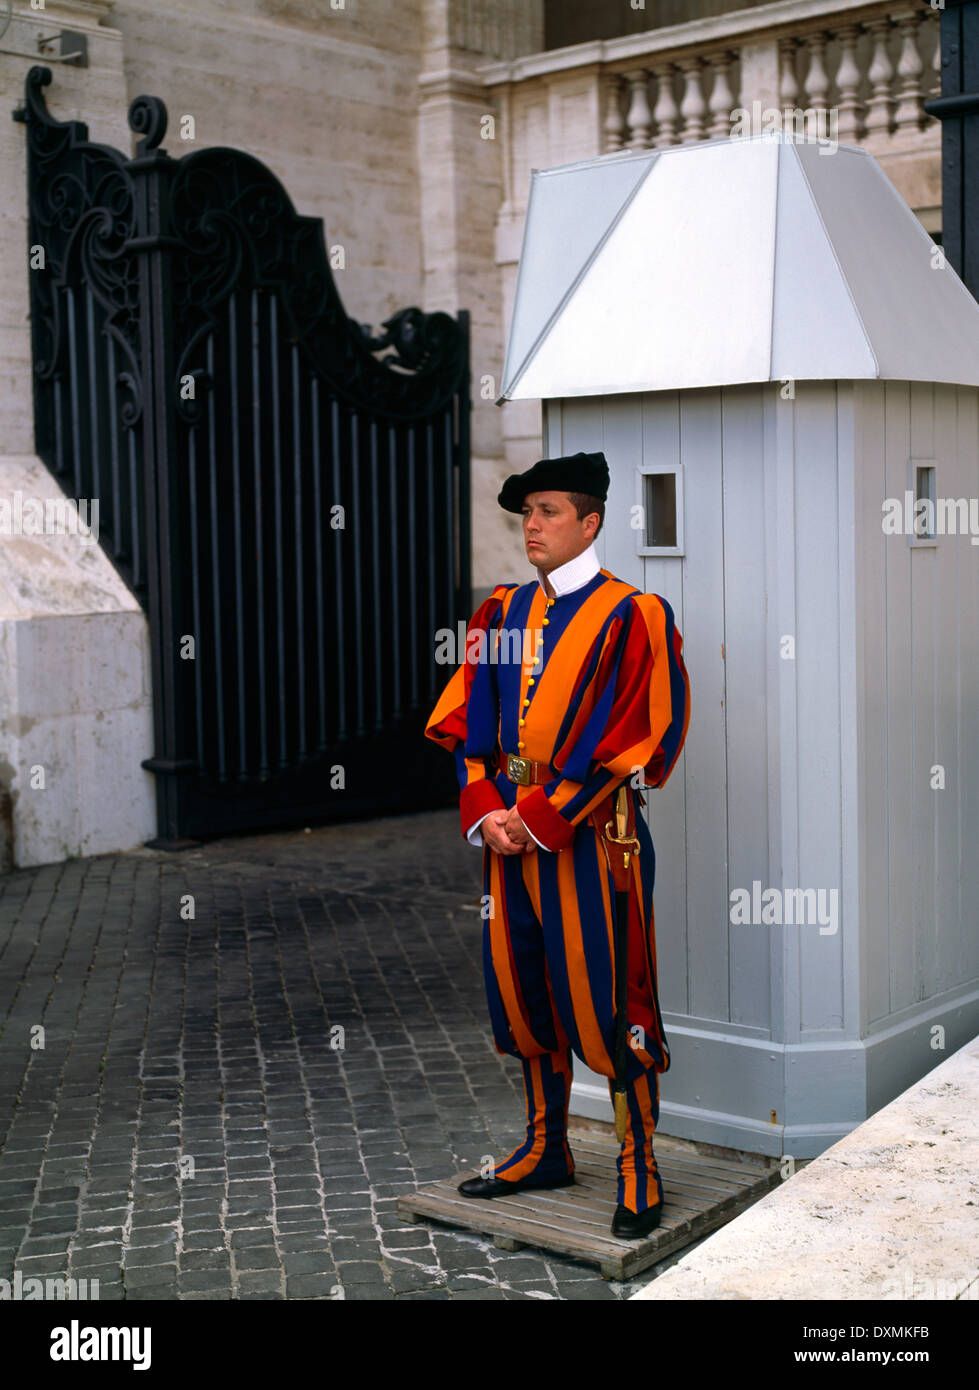 Vatican Rome Italy Pontificial Swiss Guard wearing Tricolour Uniform with Dress Sword Stock Photo